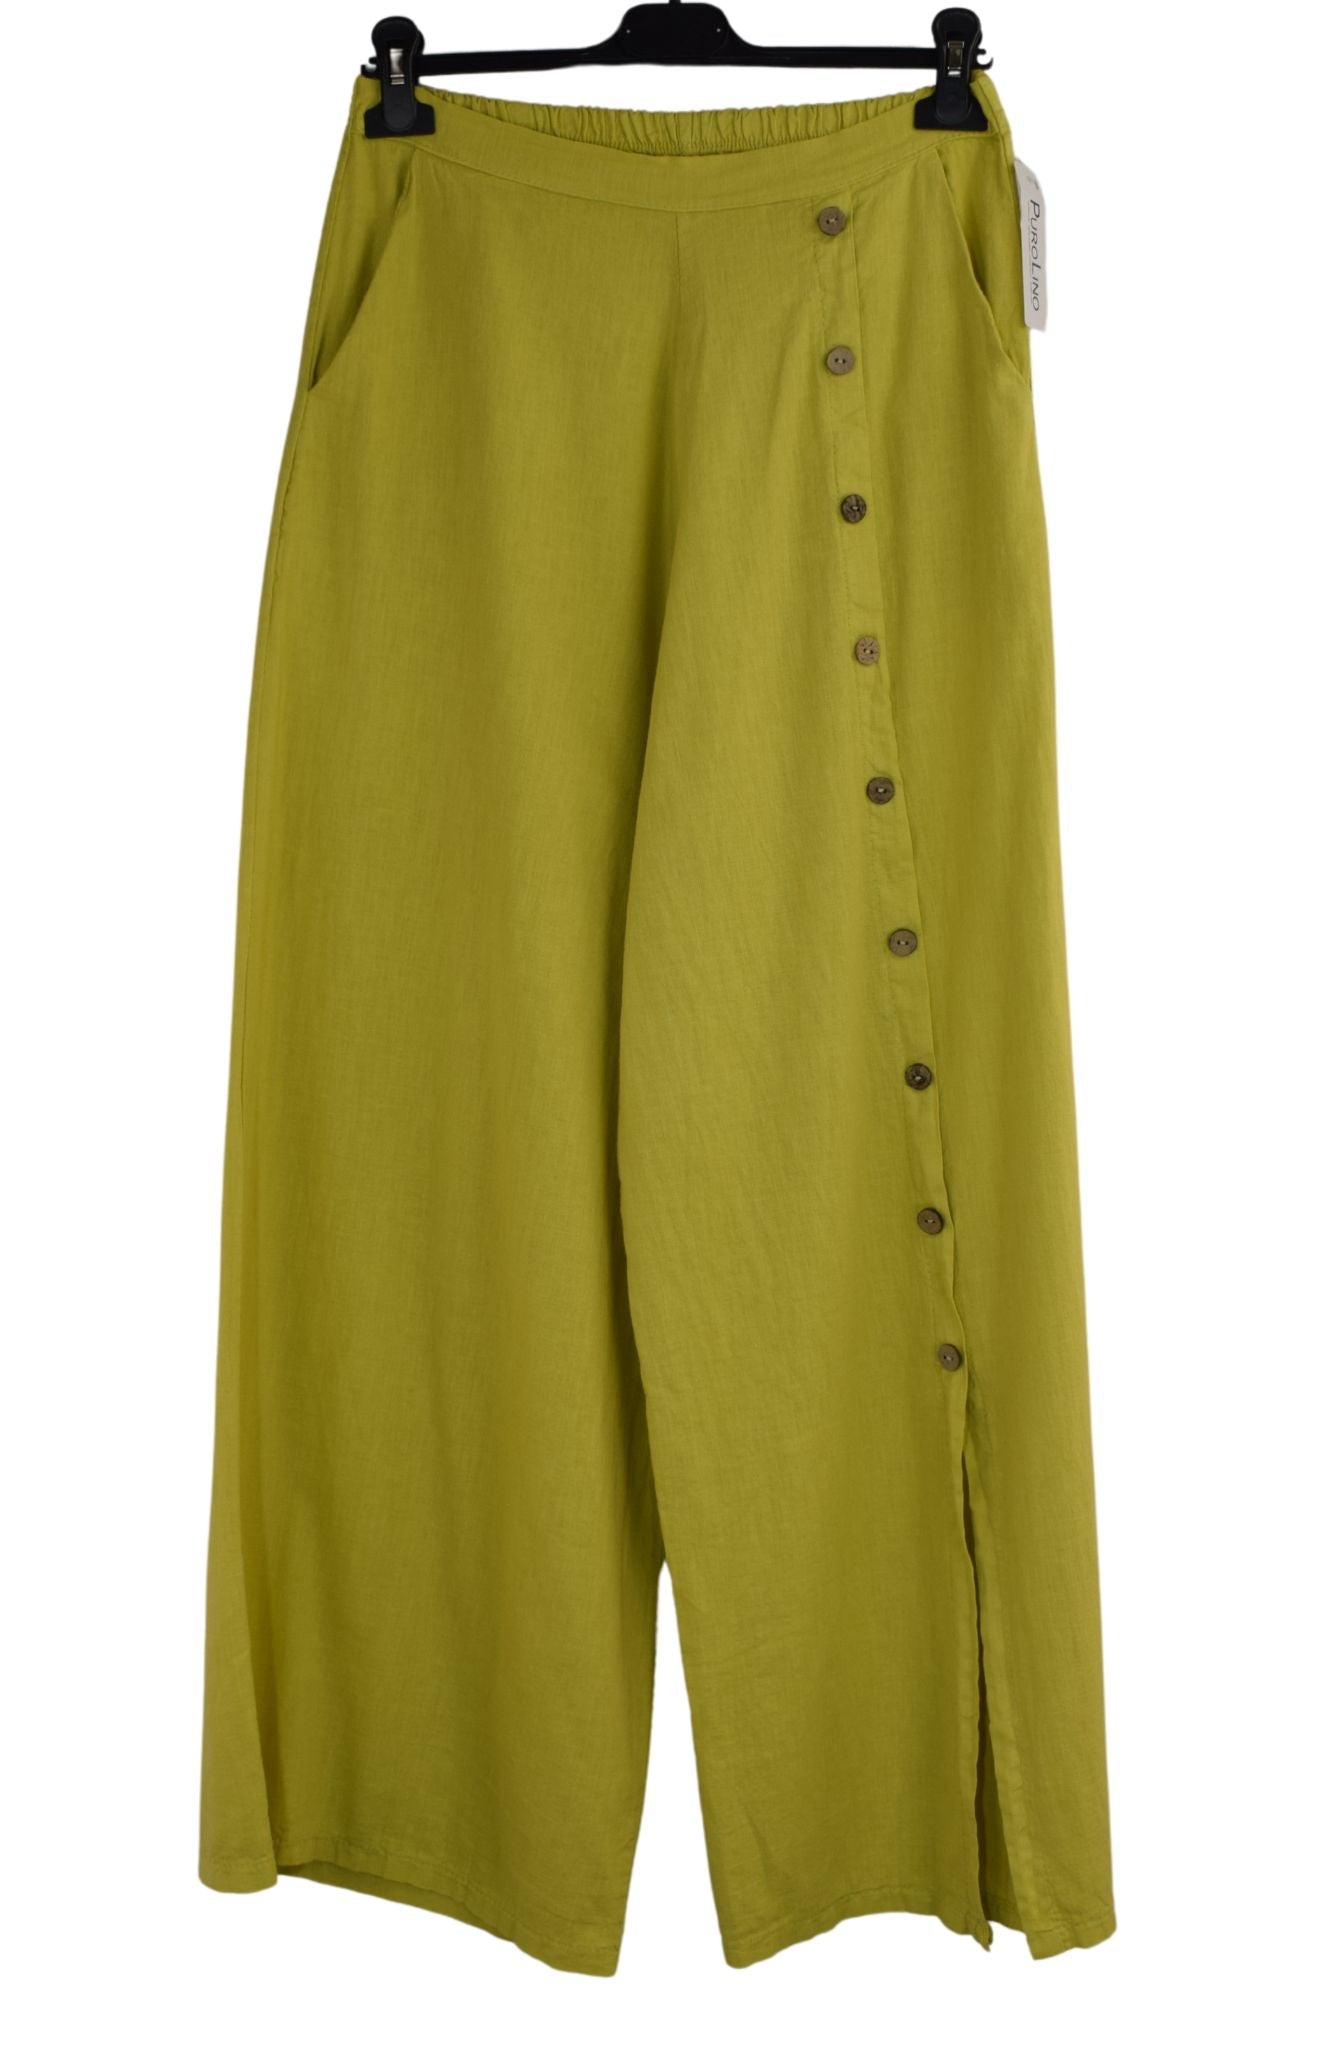 Linen Wide Leg Trouser with Button Detailing Palazzo Trouser for Women Casual Culottes